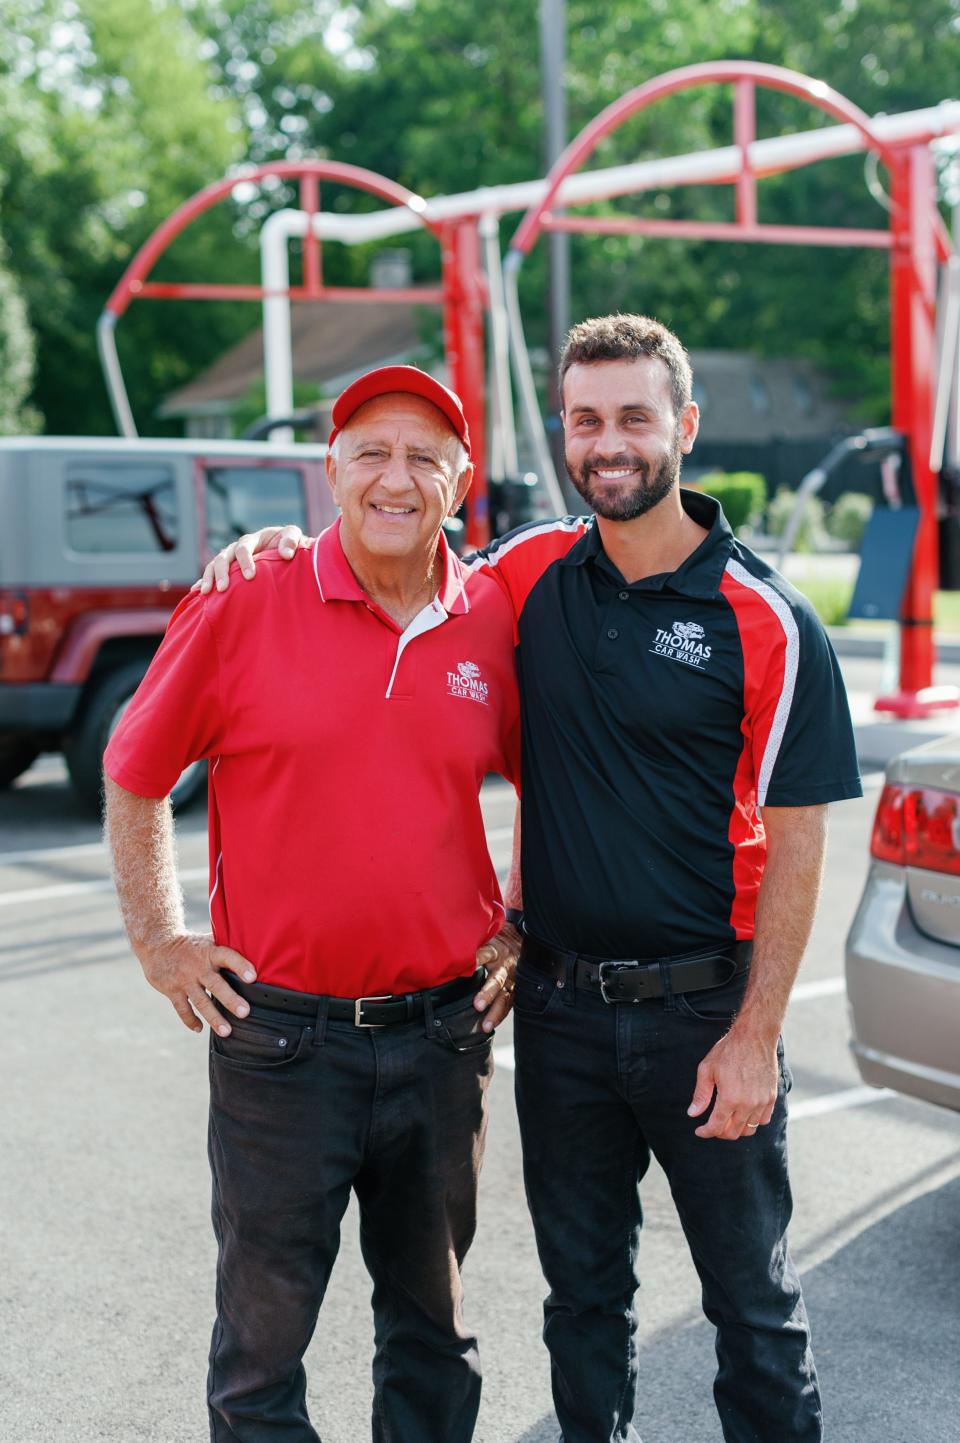 Alex Thomas, the owner of Thomas Car Wash poses with his father Eli Thomas. The car wash has been in the Thomas family for over 75 years.